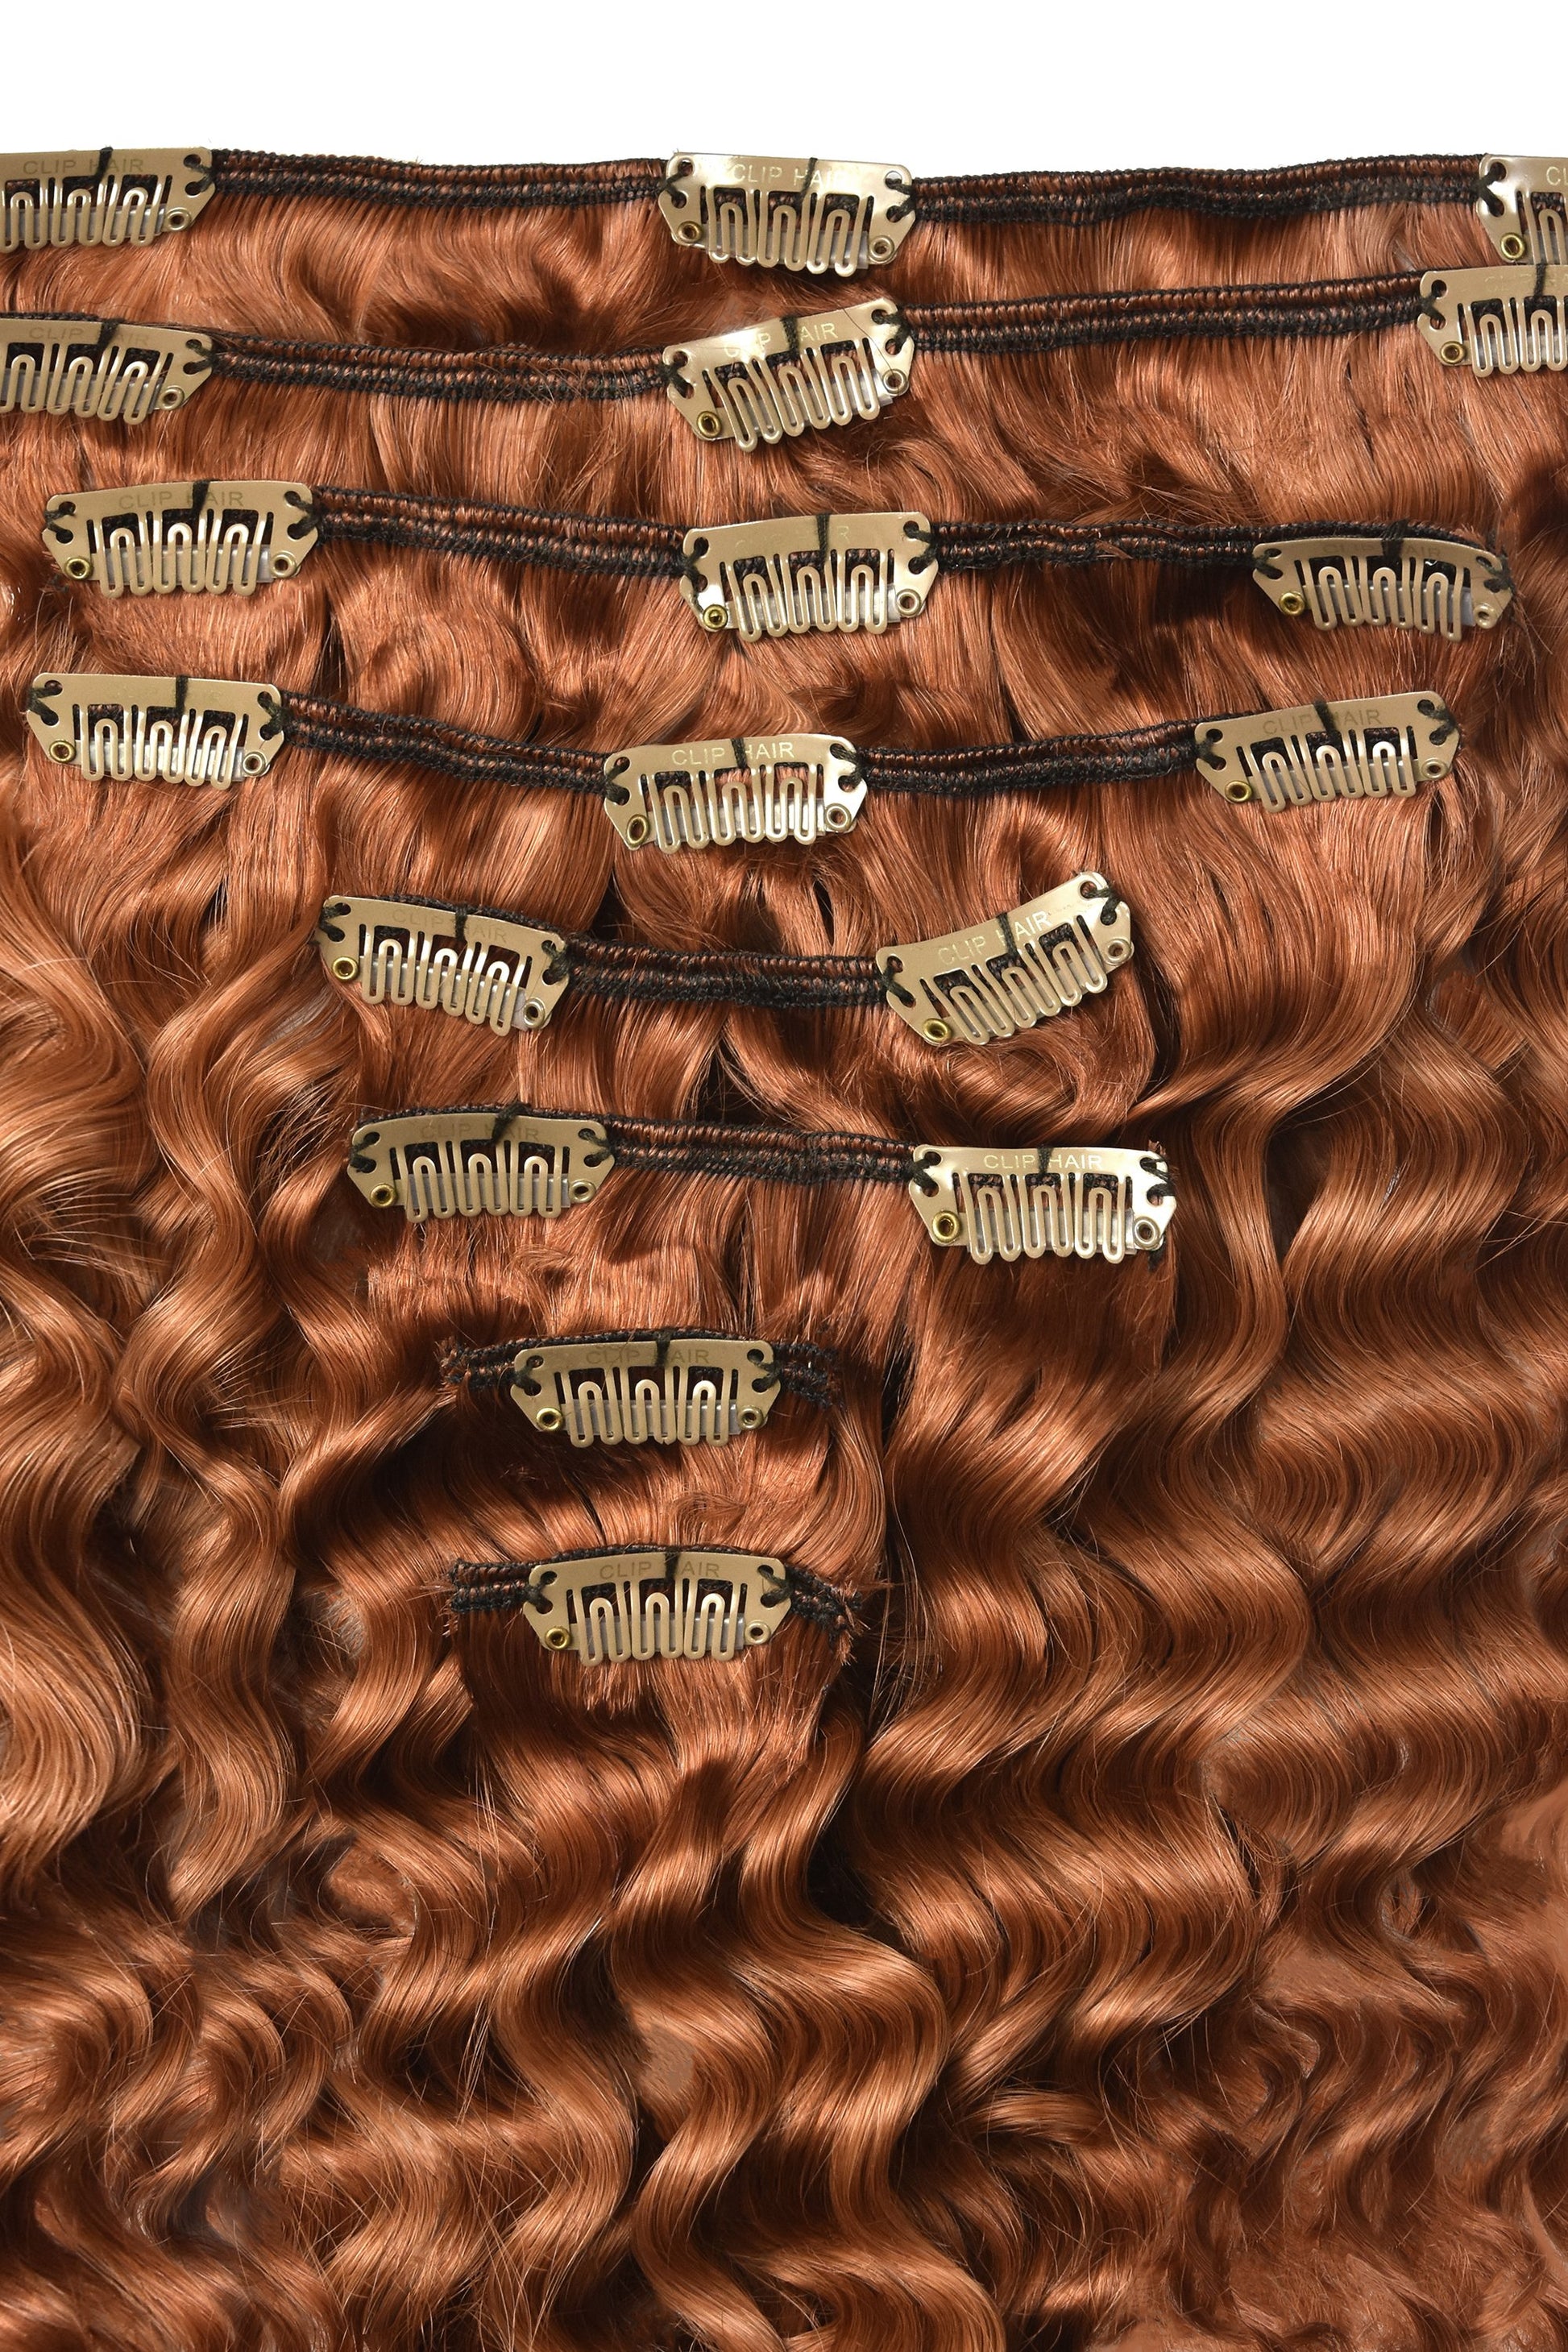 Curly Twirl Pigtail Extensions in Ginger